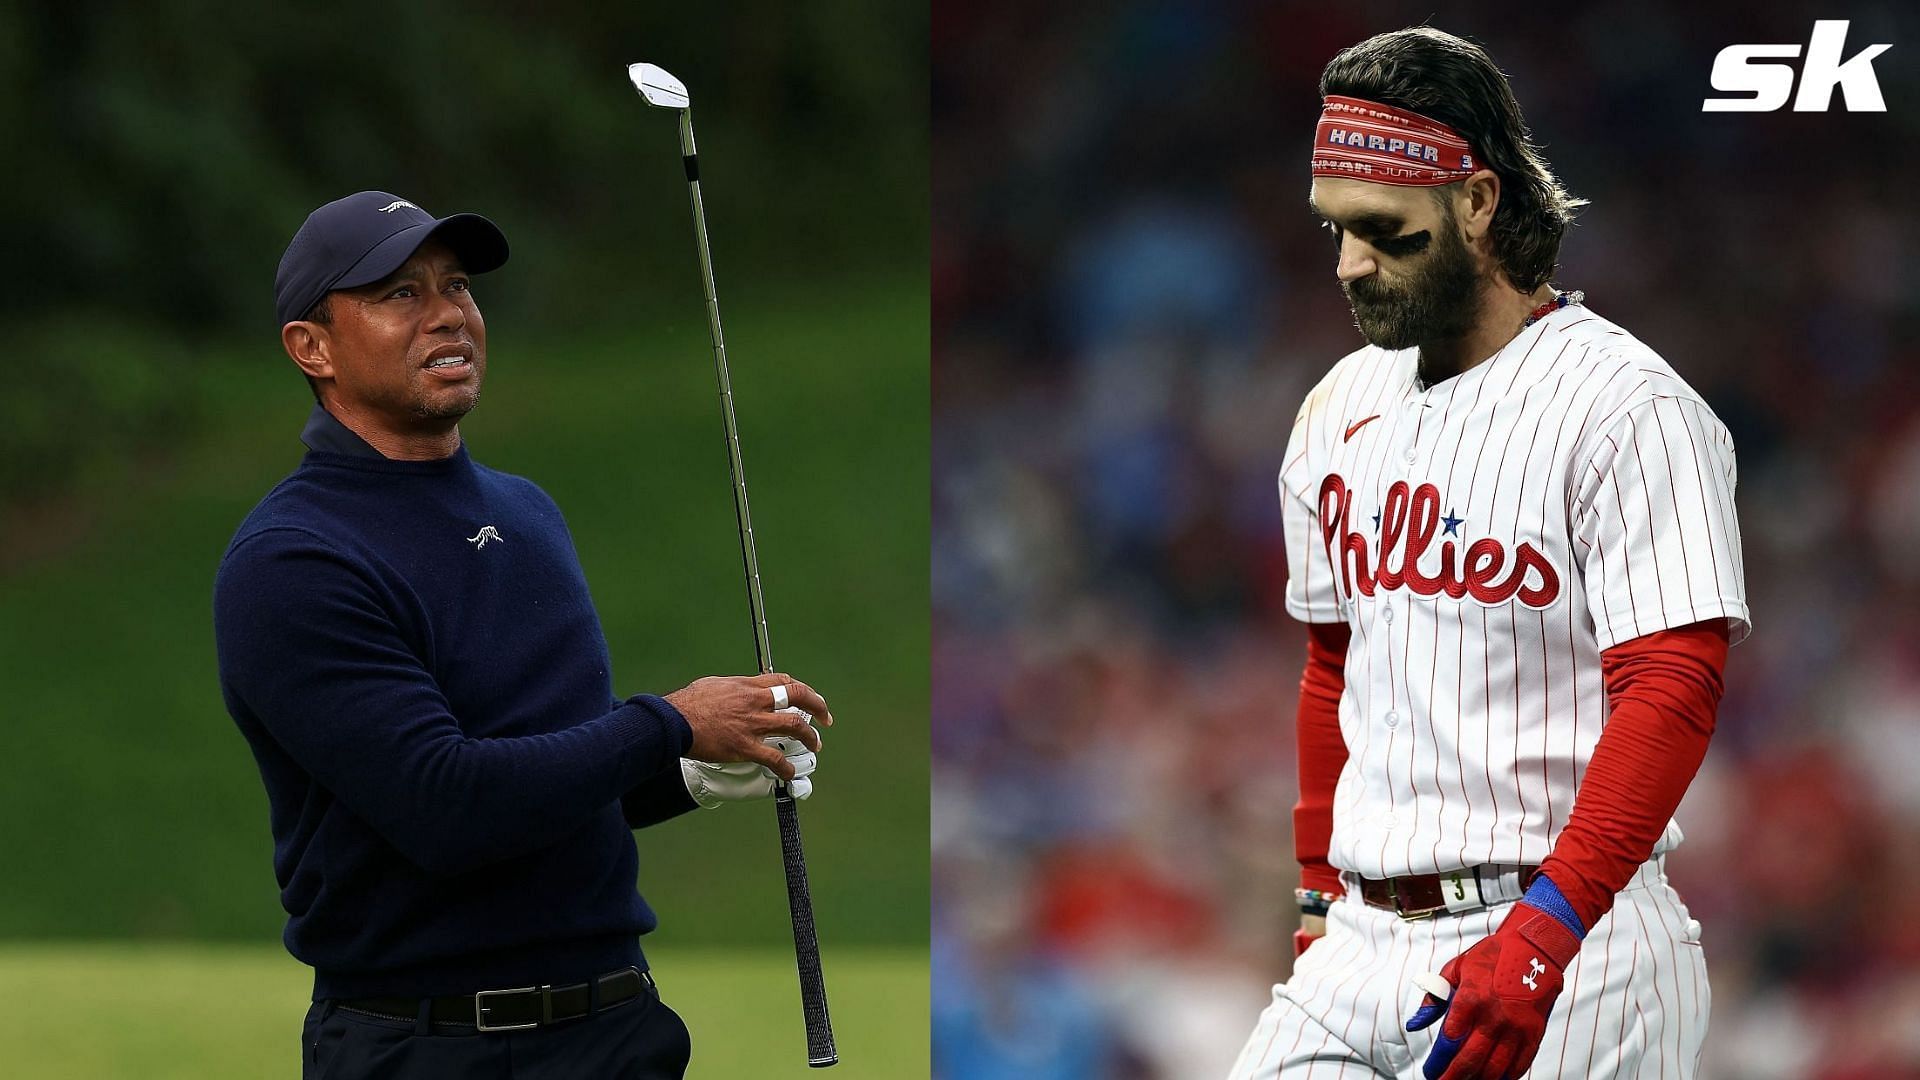 MLB analyst Chris Rose compares the lingering back issues of Bryce Harper to golf icon Tiger Woods